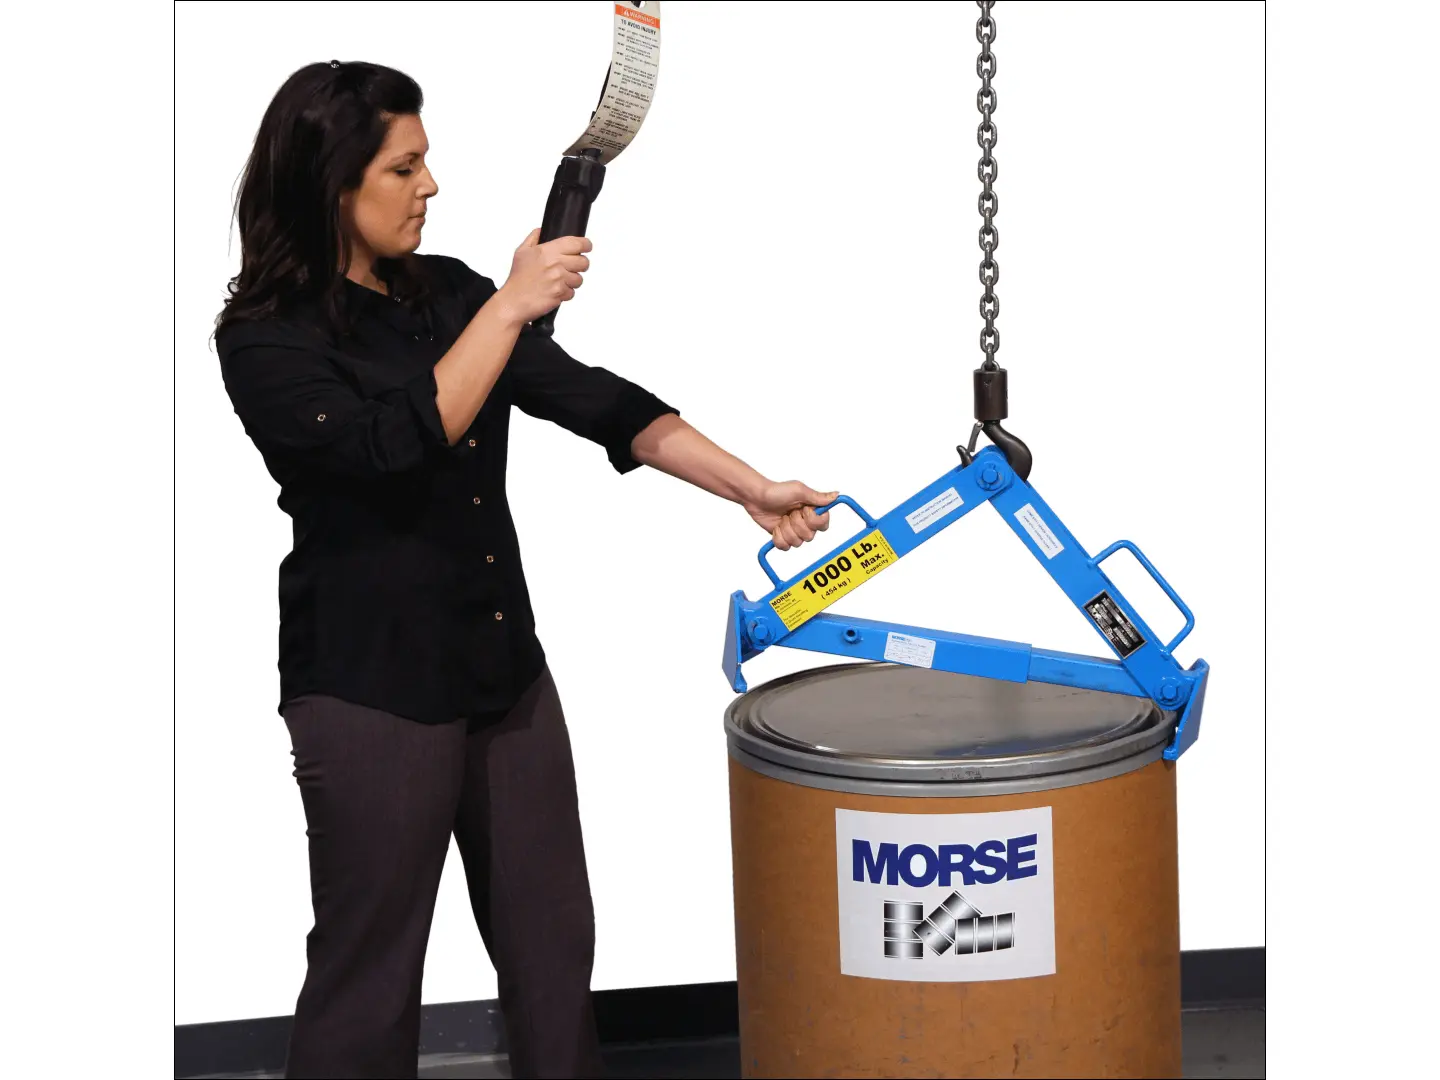 Below-Hook Drum Lifter to lift a fiber drum with lid on and secure